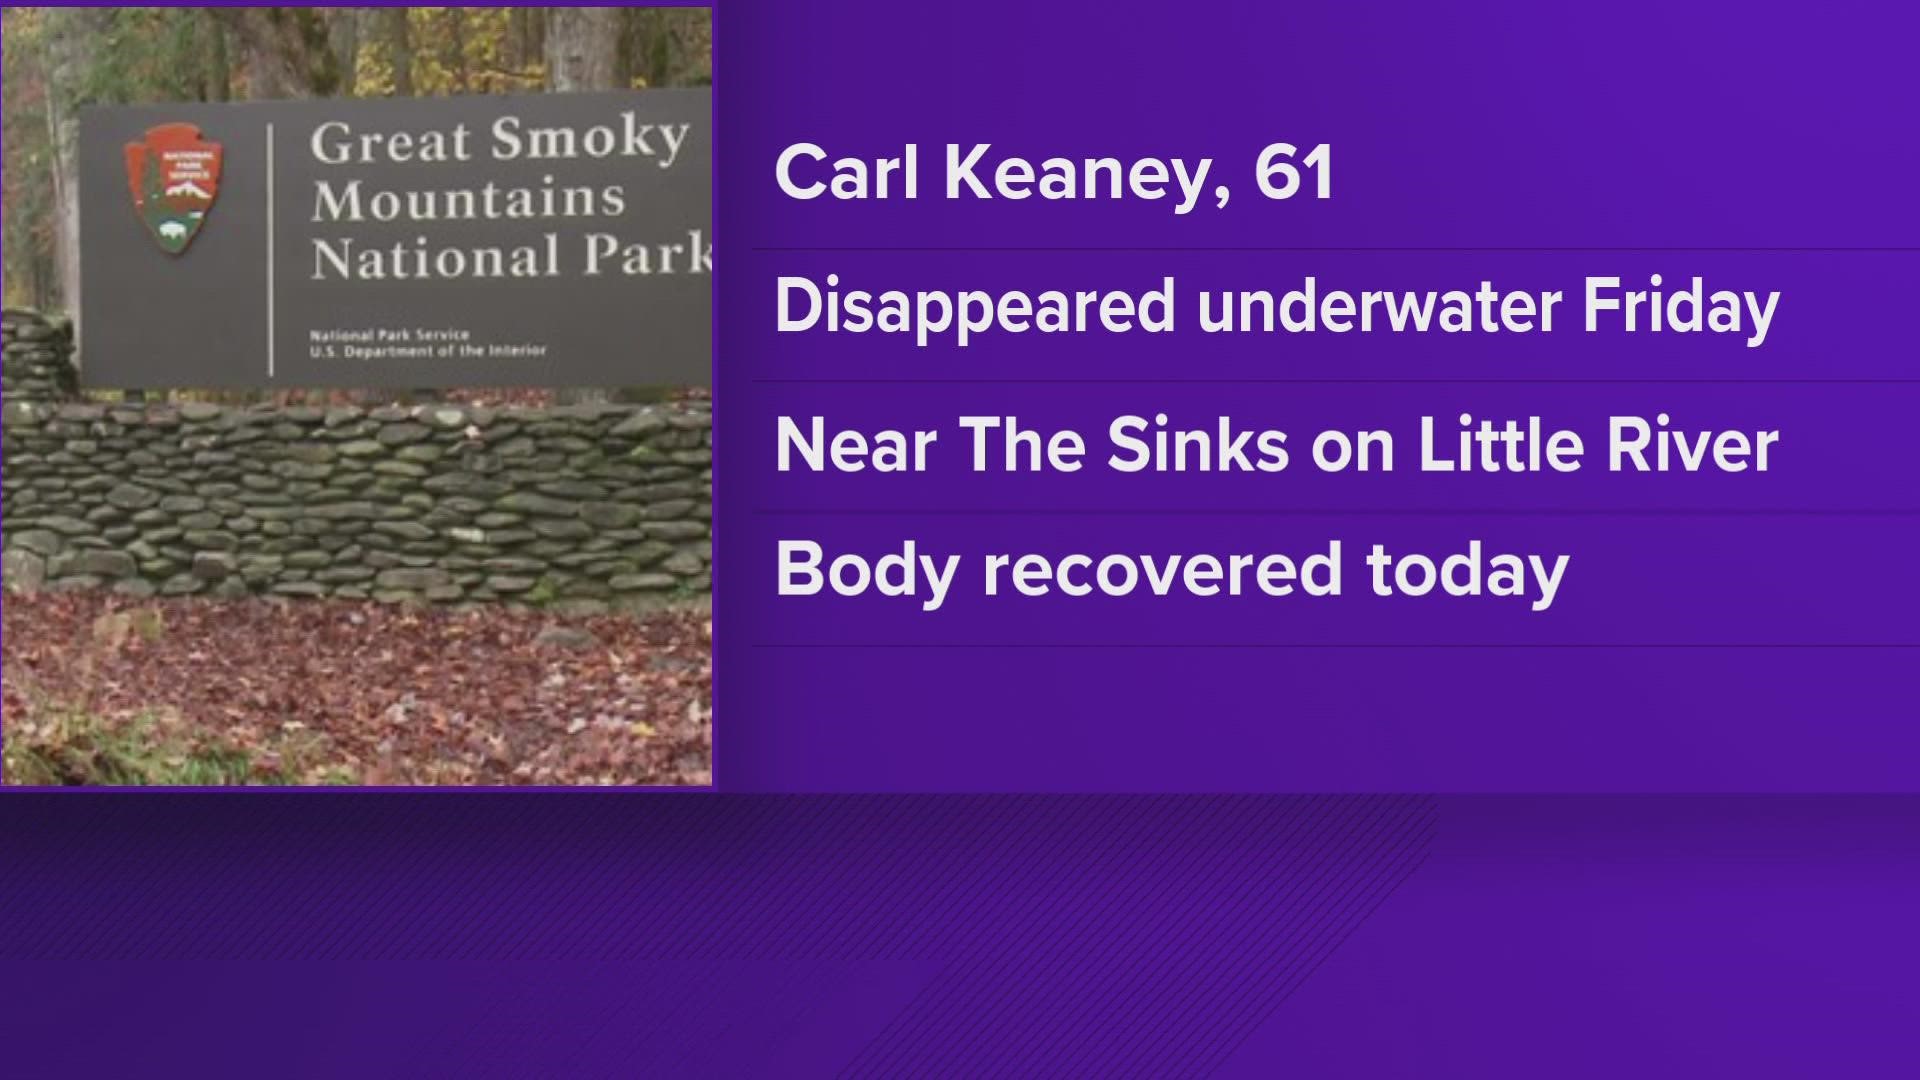 The park said 61-year-old Carl Keaney disappeared underwater Friday near The Sinks area of the Little River.